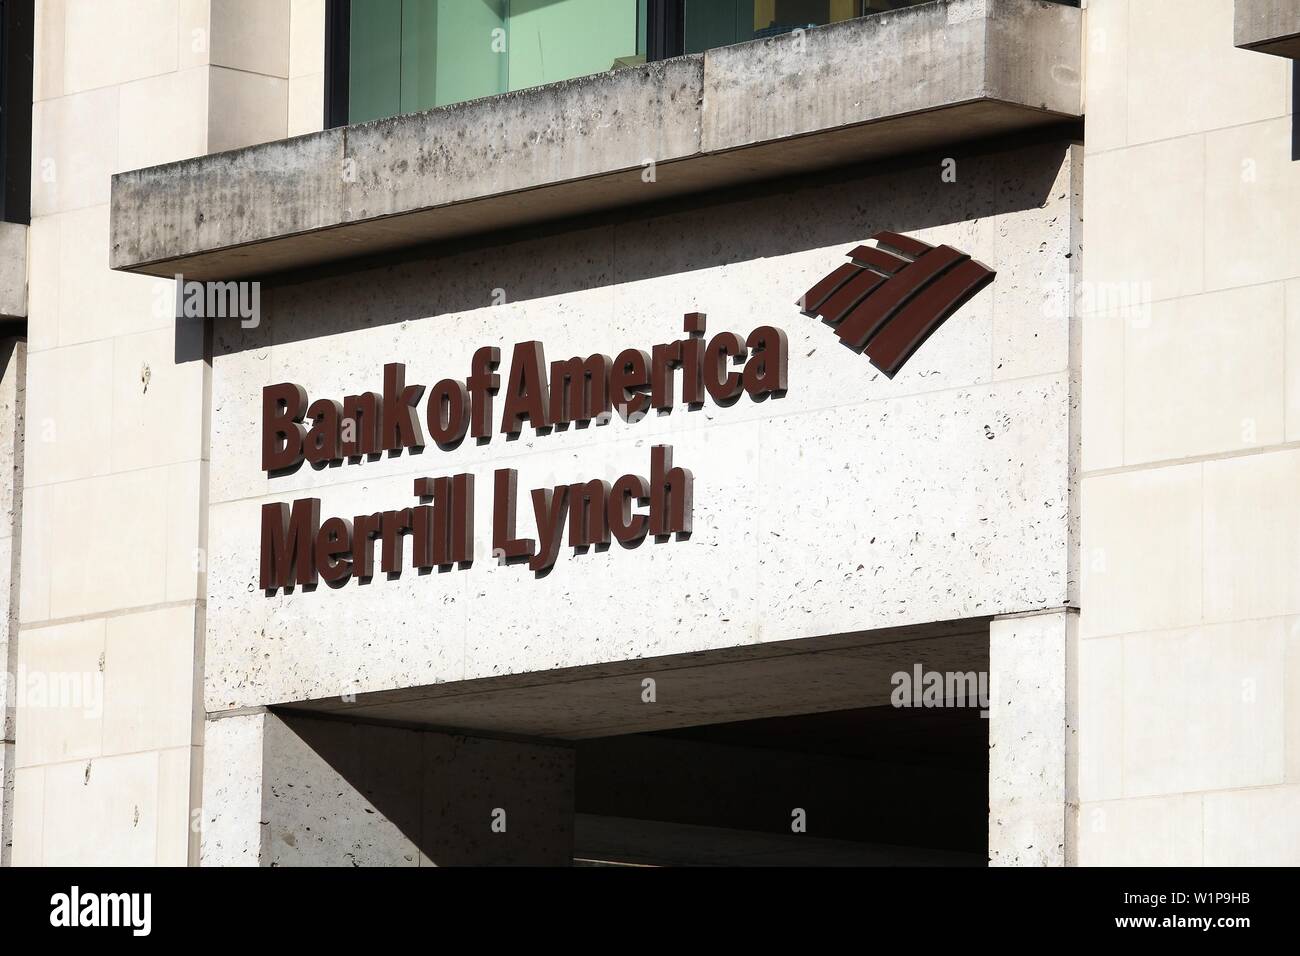 LONDON, UK - JULY 8, 2016: Bank of America Merrill Lynch branch in London. Merrill Lynch is the wealth management division of Bank of America. Stock Photo